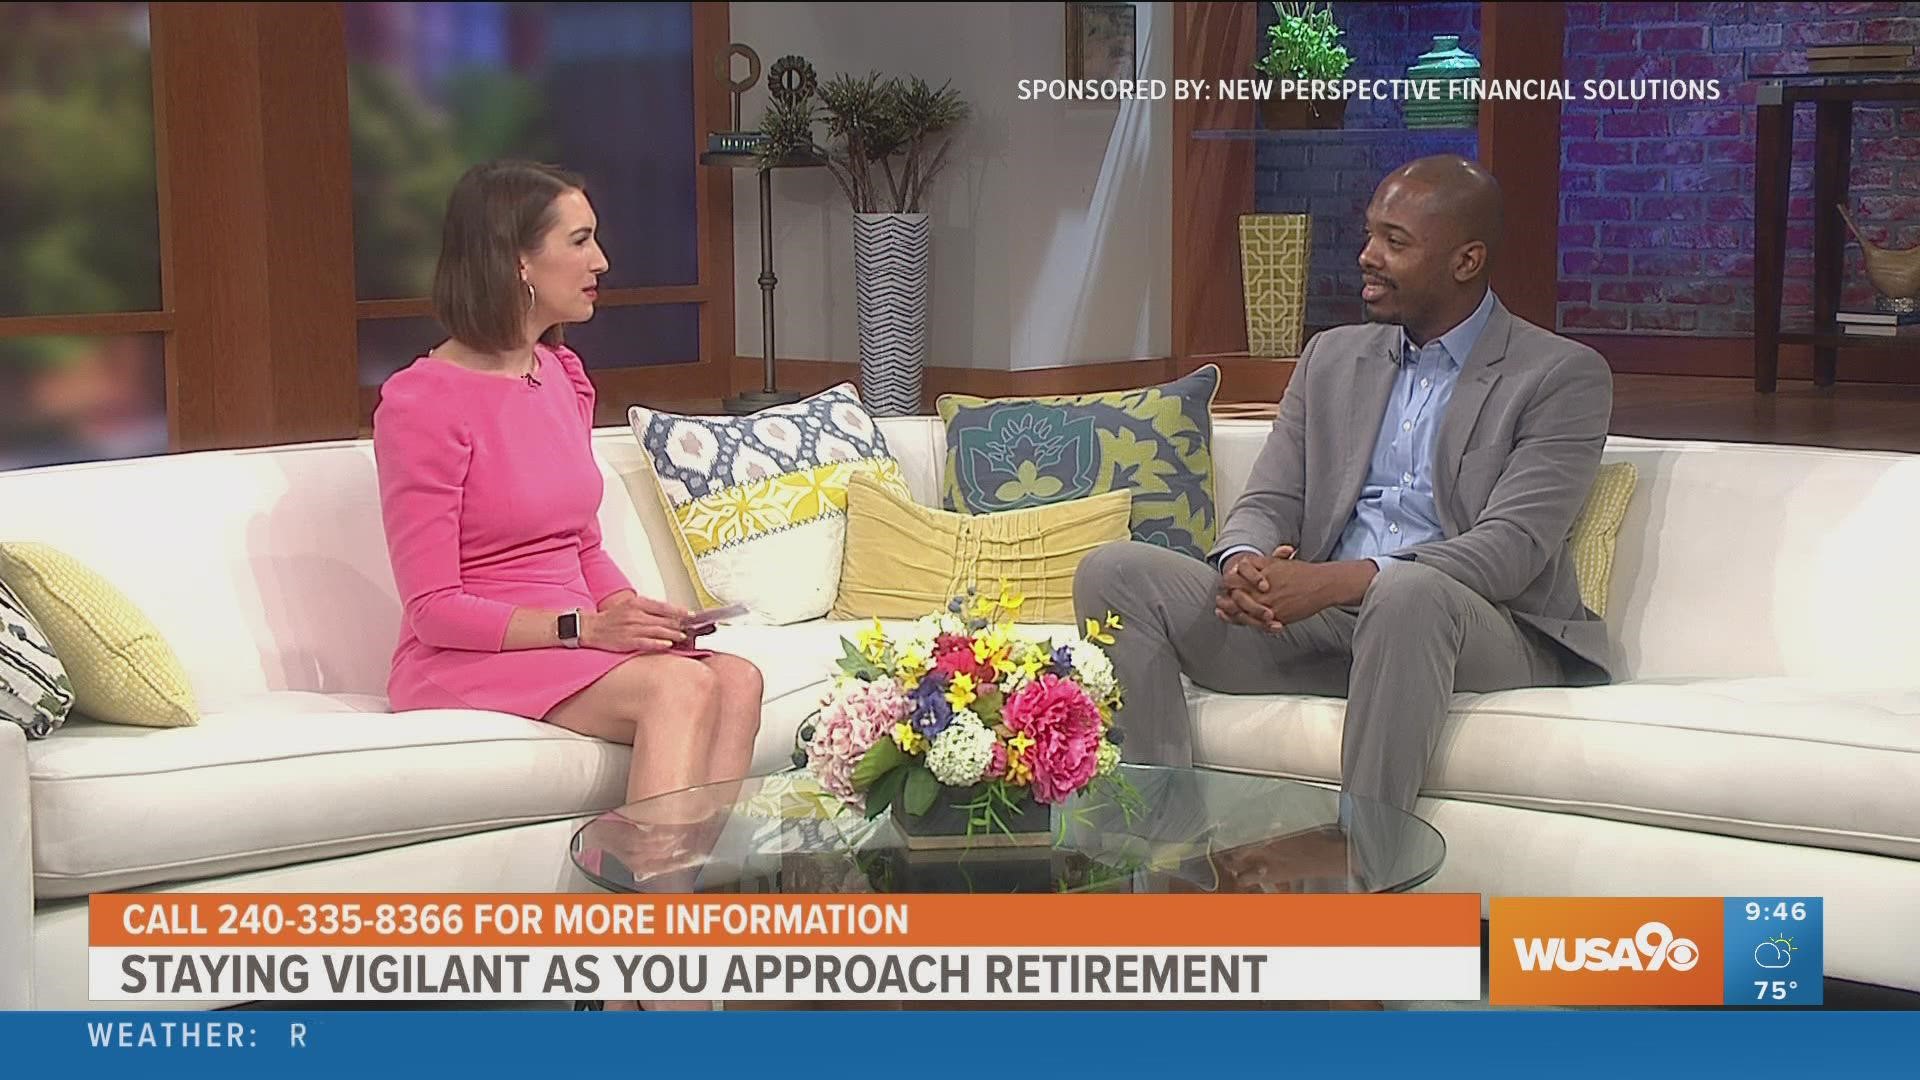 Financial expert Tayvon Jackson shares tips to help you stay focused on maximizing your retirement goals. Sponsored by New Perspective Financial Solutions.